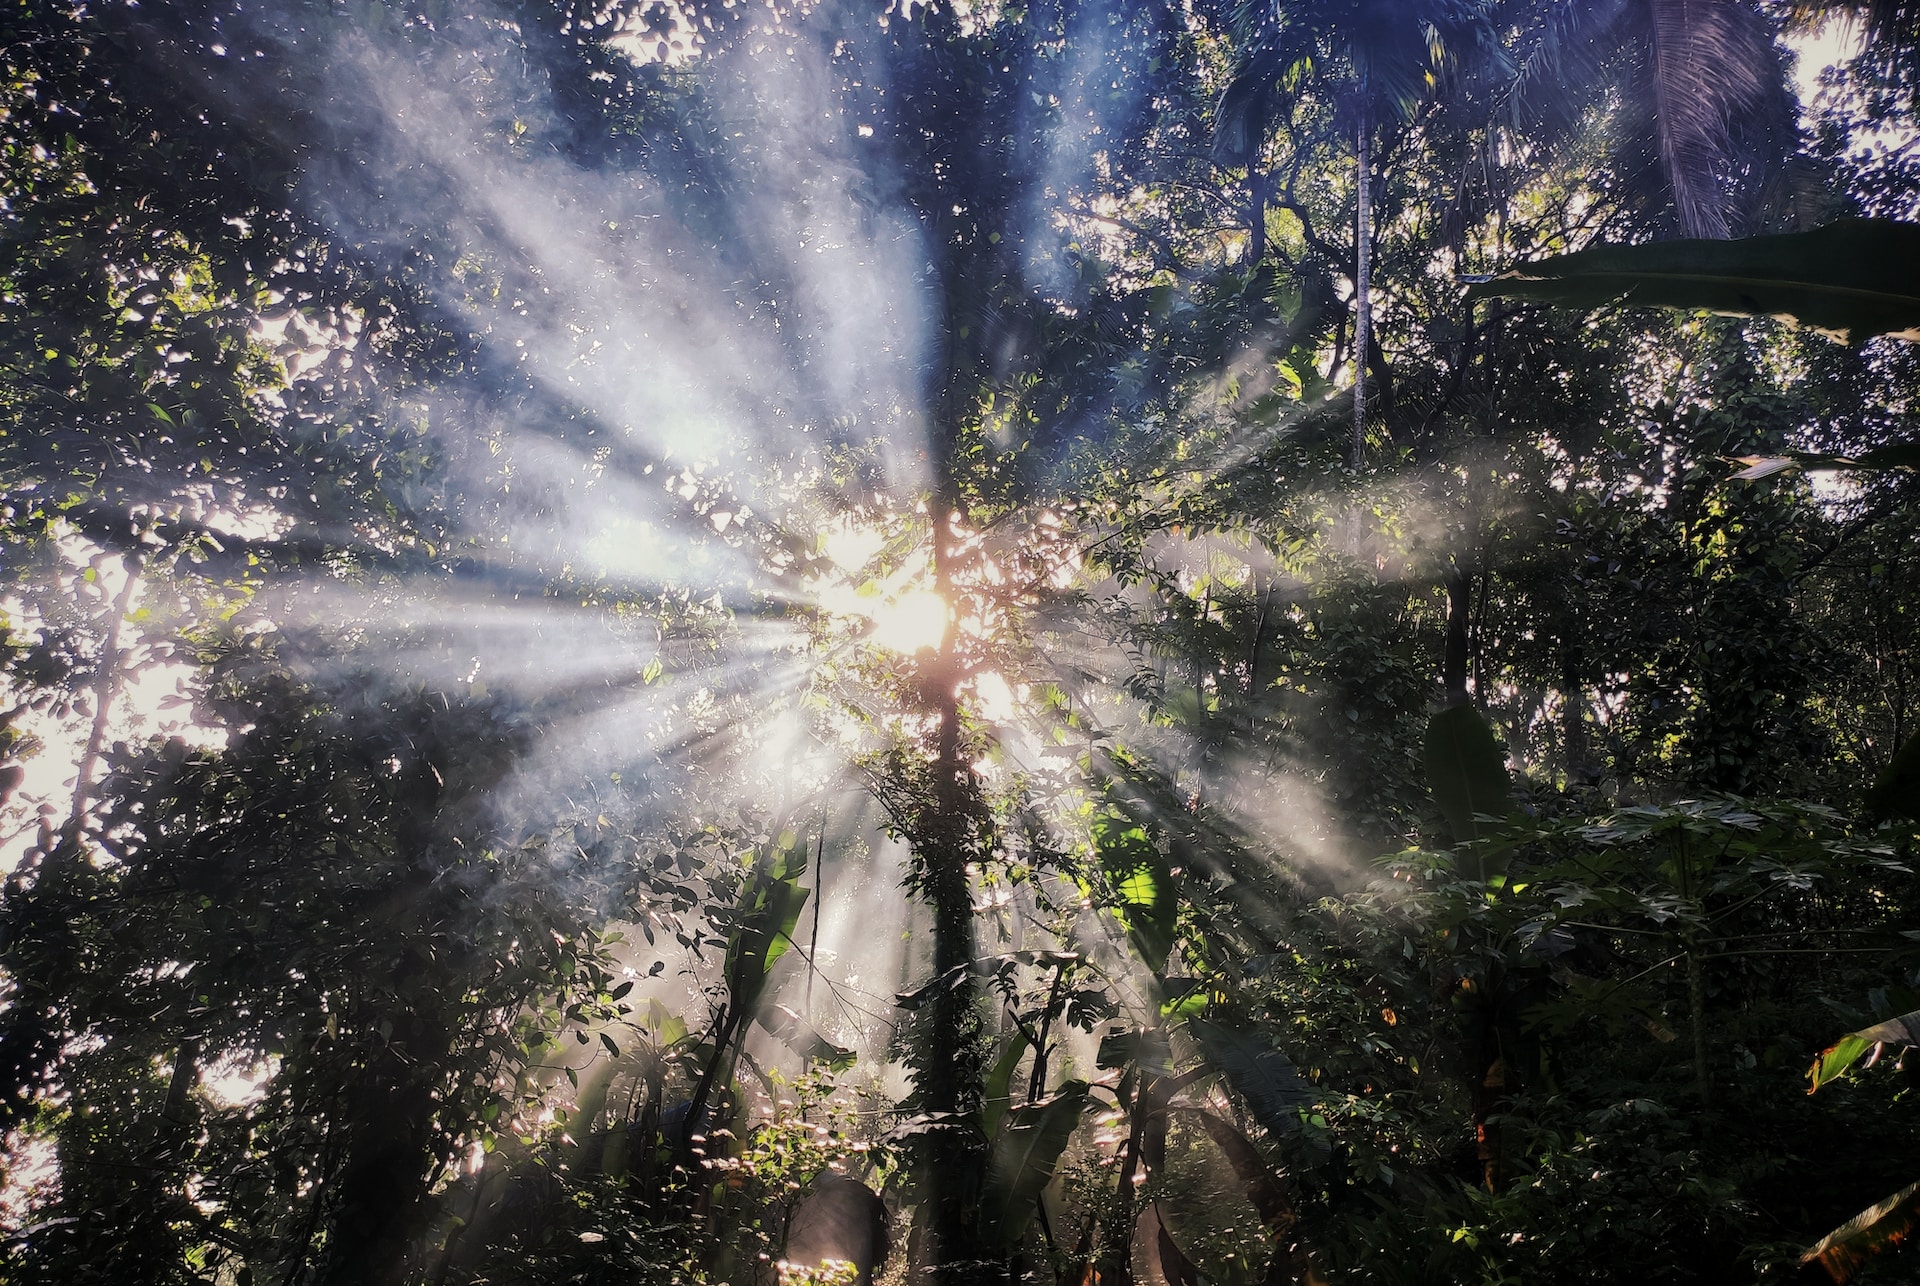 A beam of light shinning though the forest